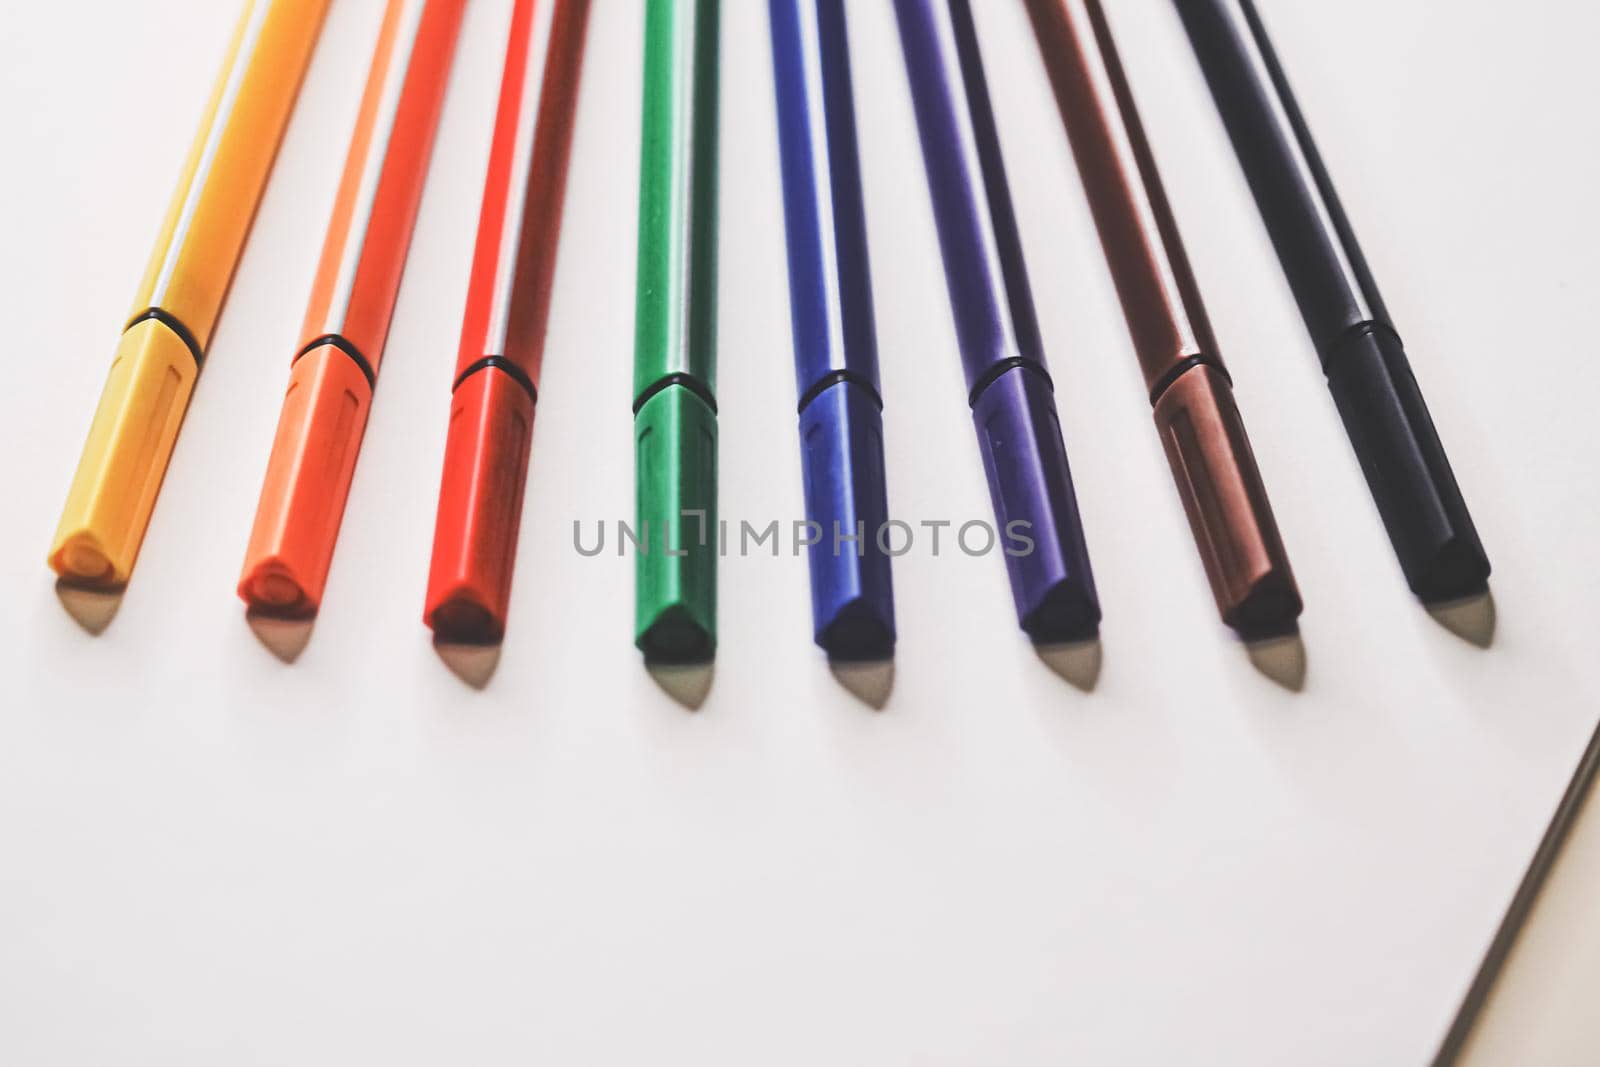 Colourful felt-tip pens for drawing by Anneleven